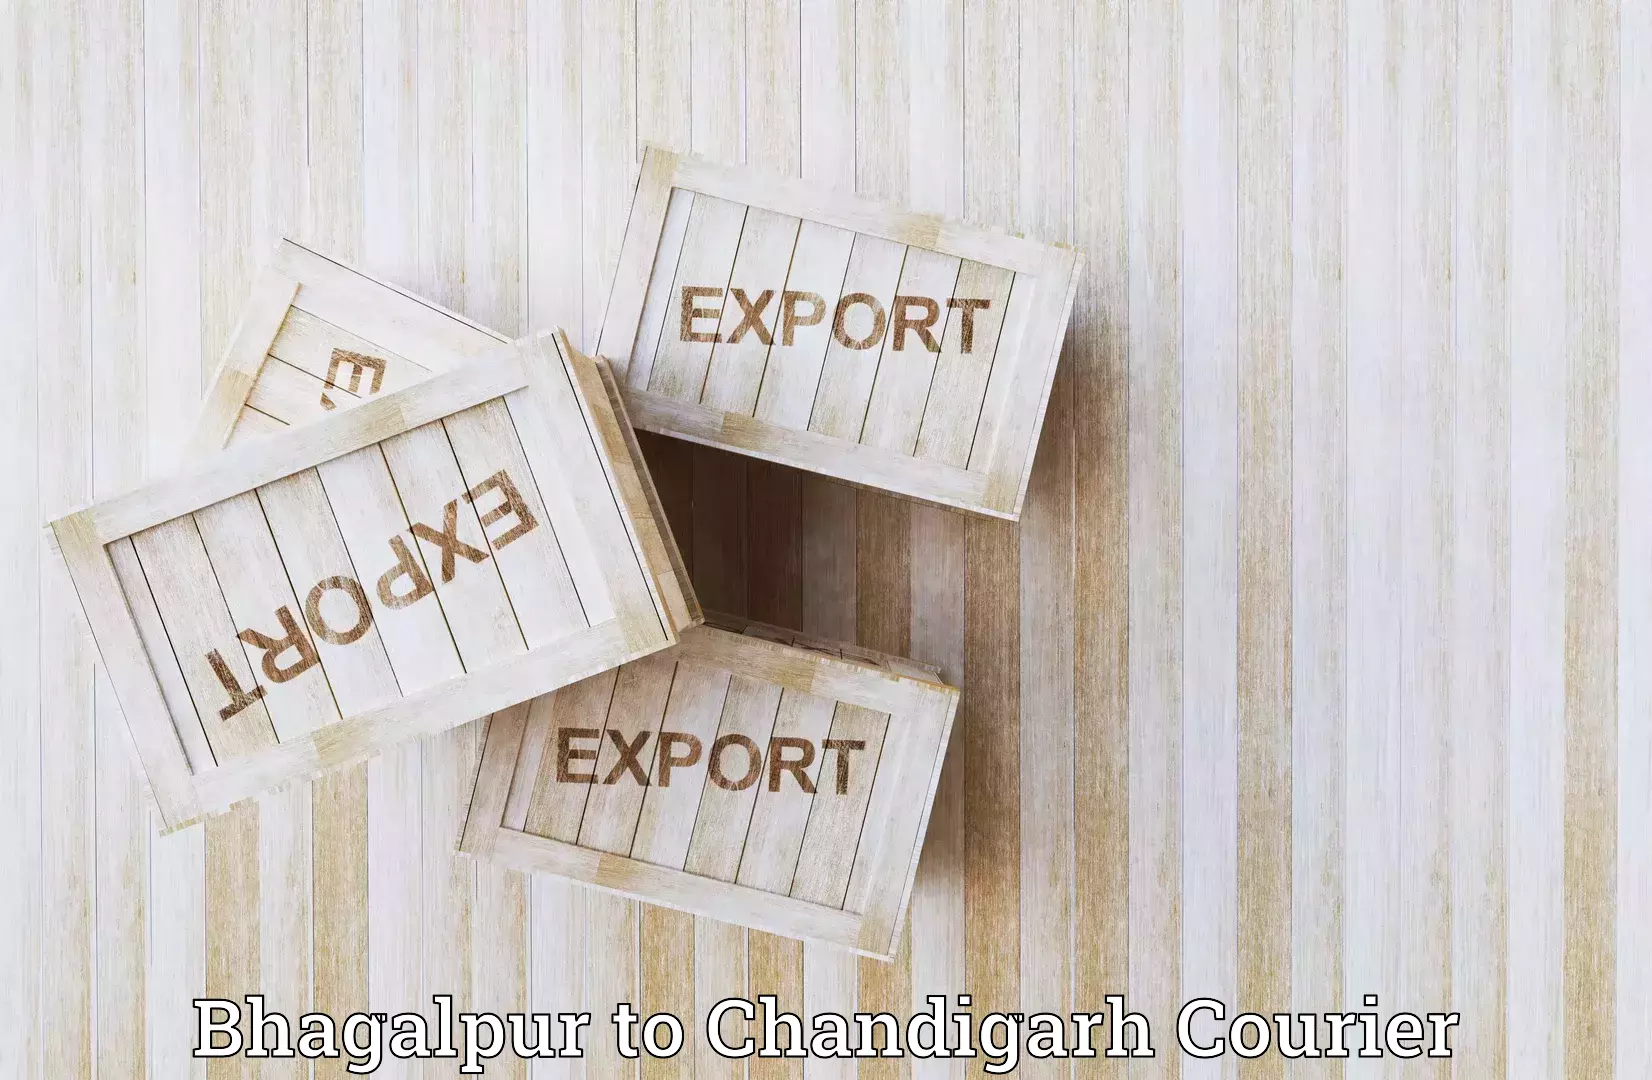 Global shipping solutions Bhagalpur to Chandigarh